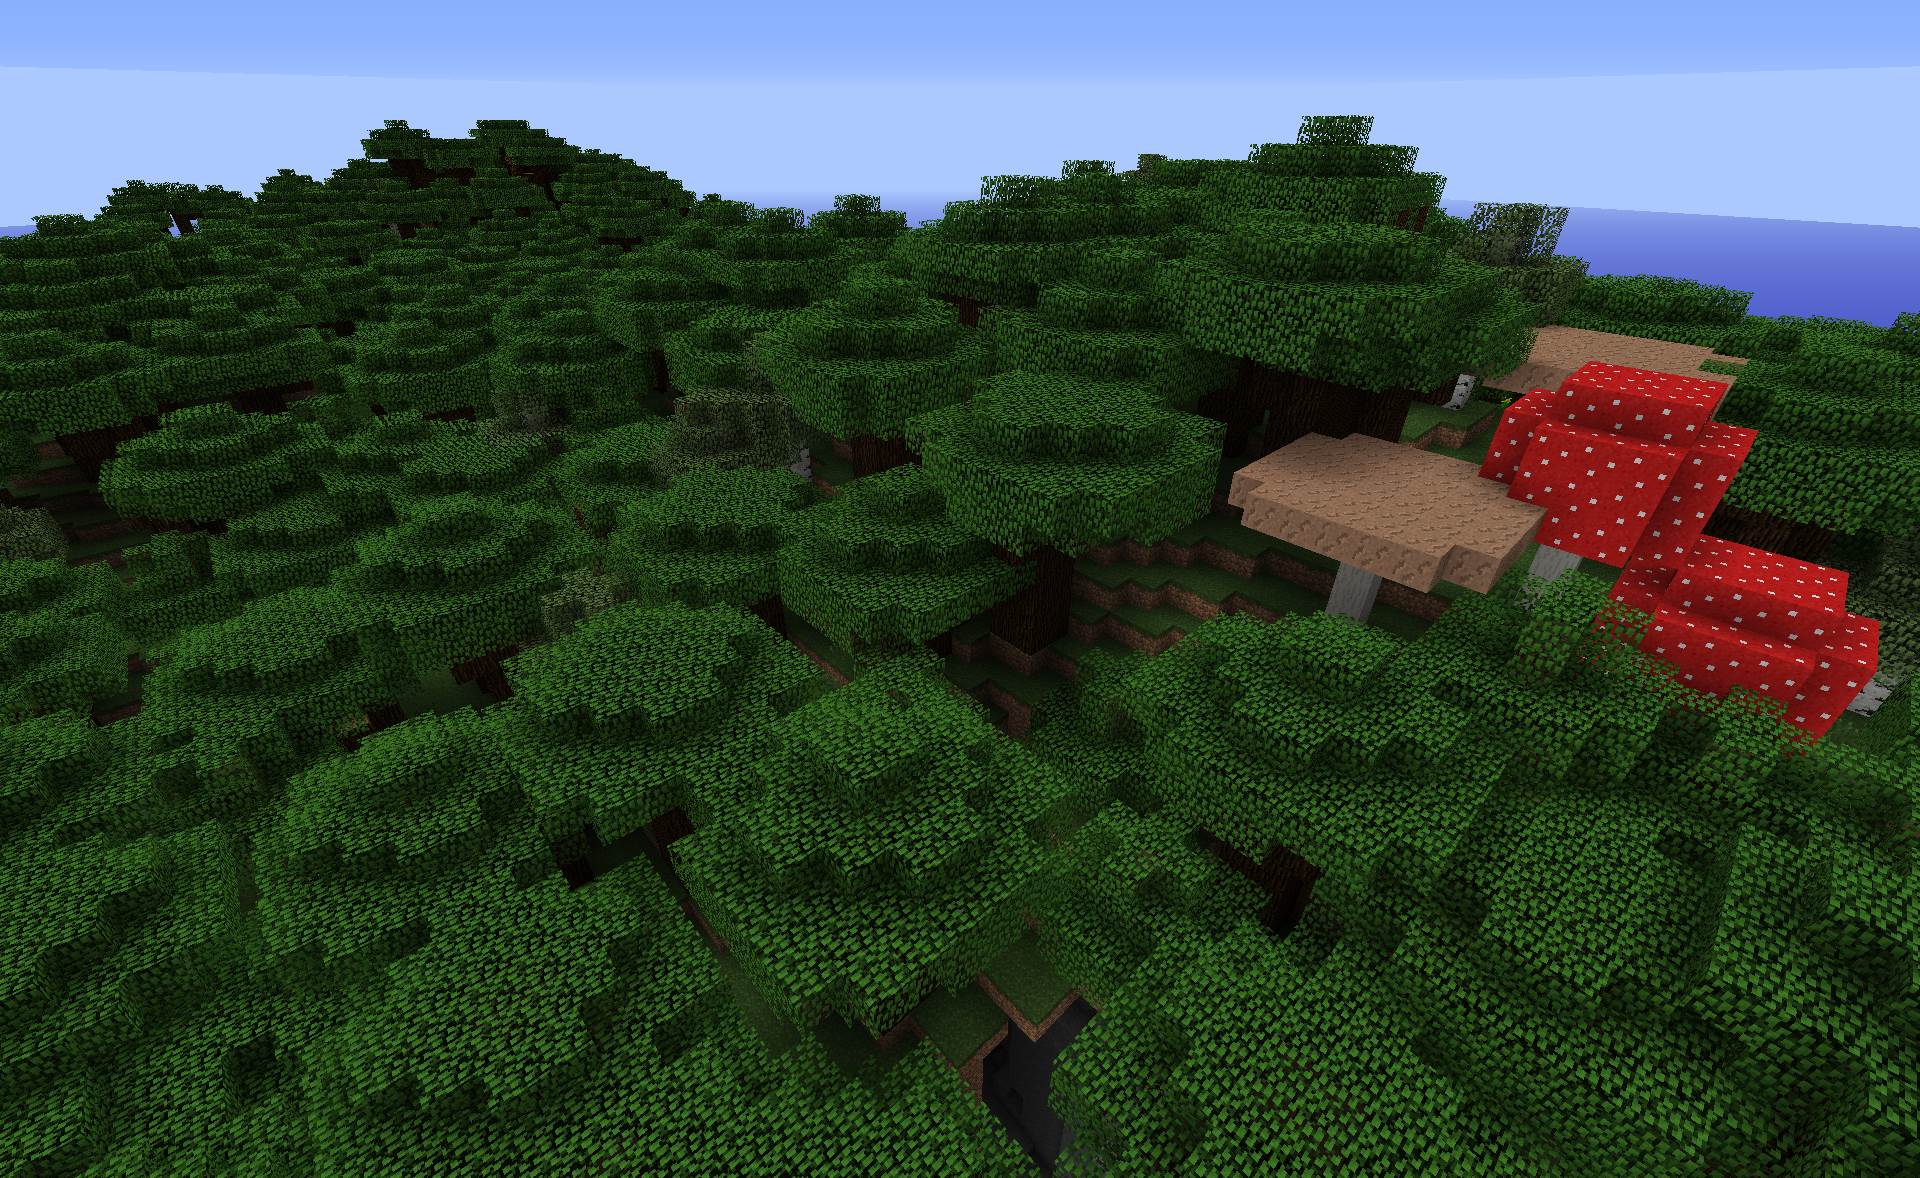 What is the title of this picture ? Image - Fr-minecraft PA66 Roofed Forest 1.jpg | Biomes O' Plenty Wiki